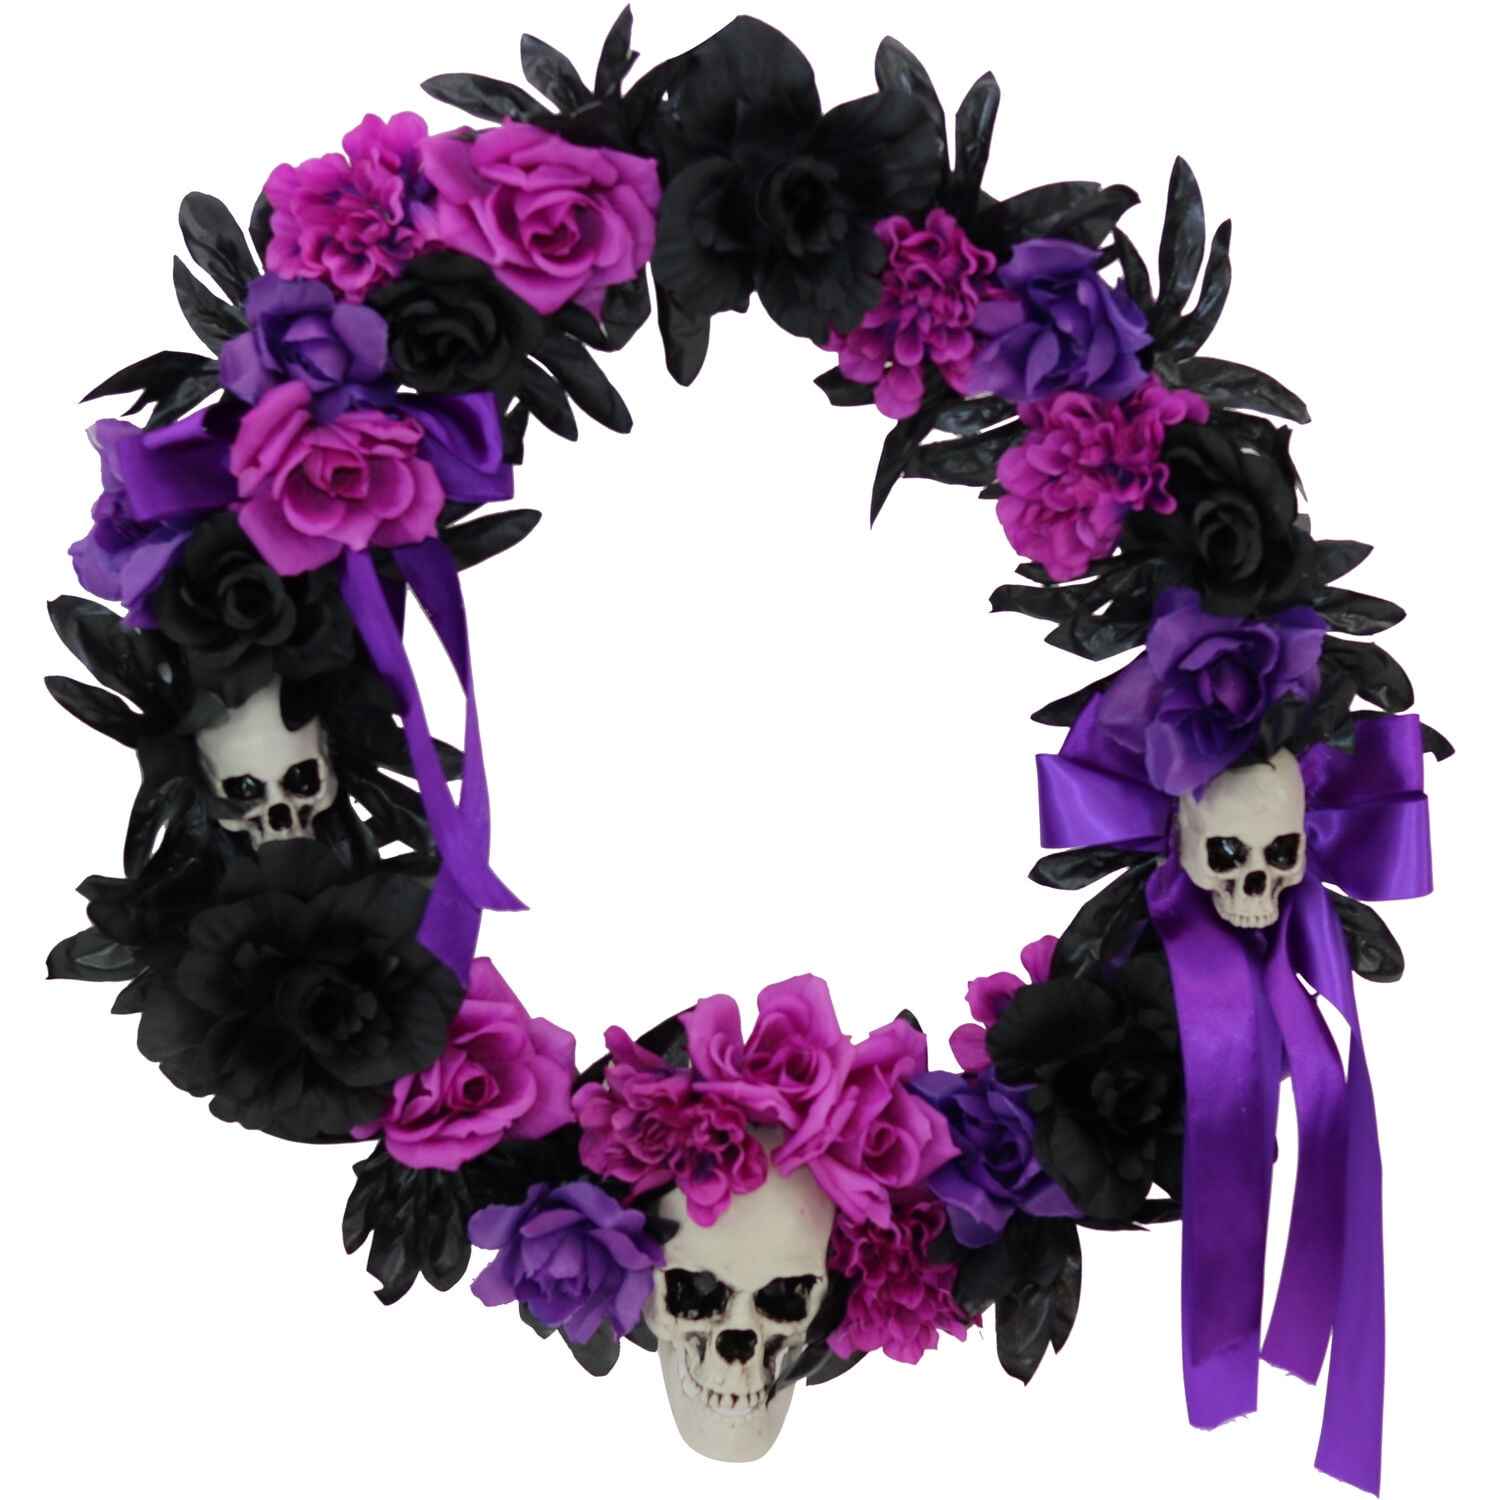 Haunted Hill Farm 1.83-ft. Halloween Wreath with Flowers and Skulls, in ...